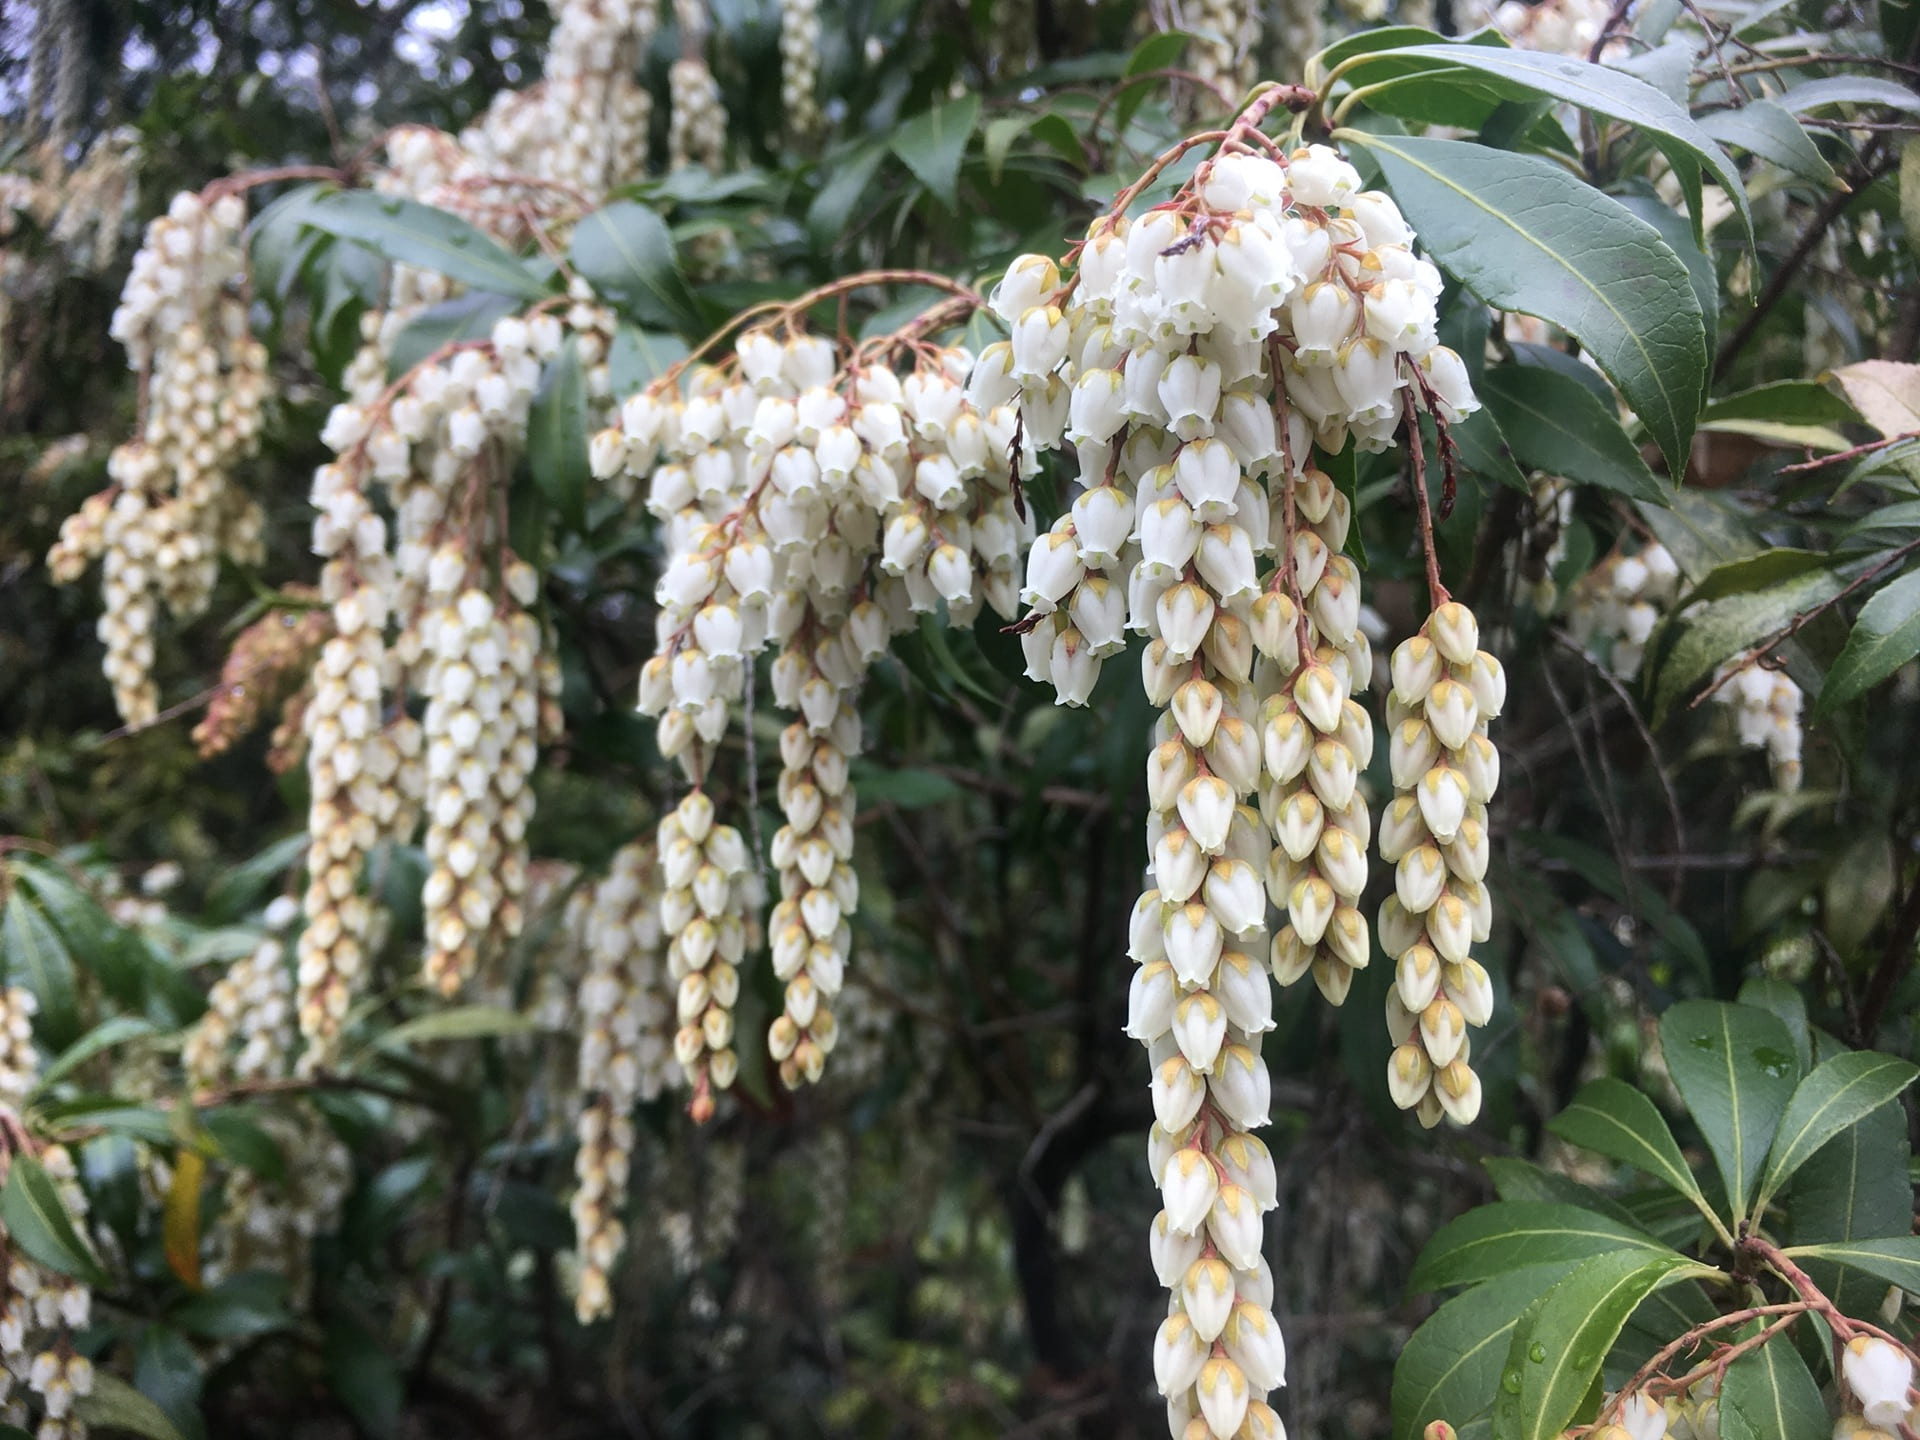 Pieris japonica's bell-like flowers it typical for it's taxonomic family, the heath family (Ericaceae).